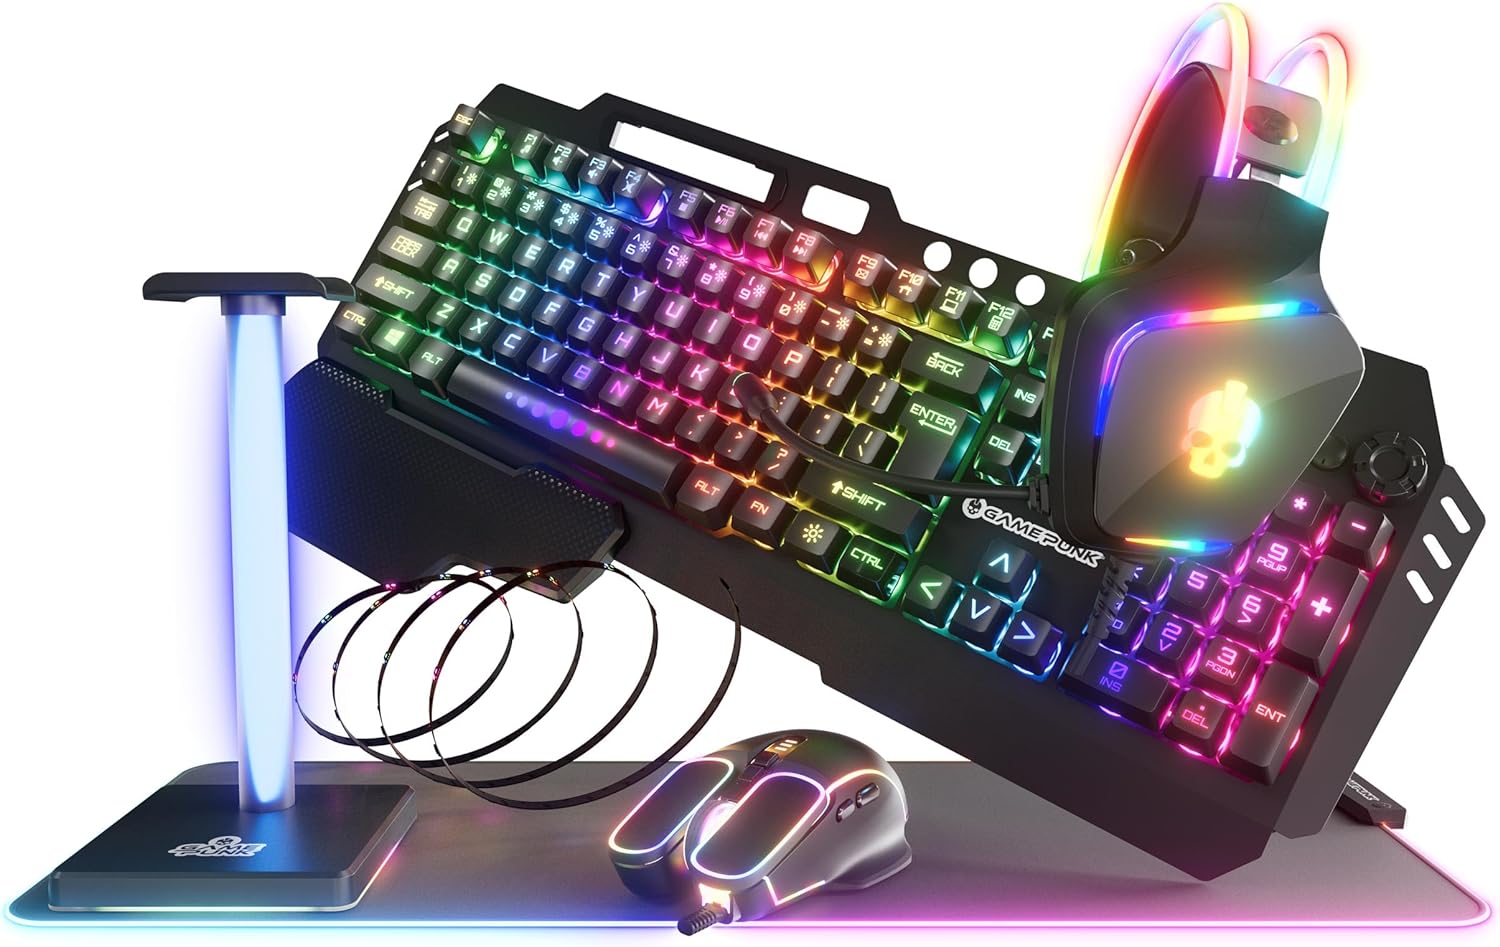 Game Punk Codebreakers PC Gaming Bundle – Includes Keyboard, Mouse, Headset, LED XL Mouse Pad, Stand, RGB Light Strip – 6-in-1 PC Gaming Accessory Bundle